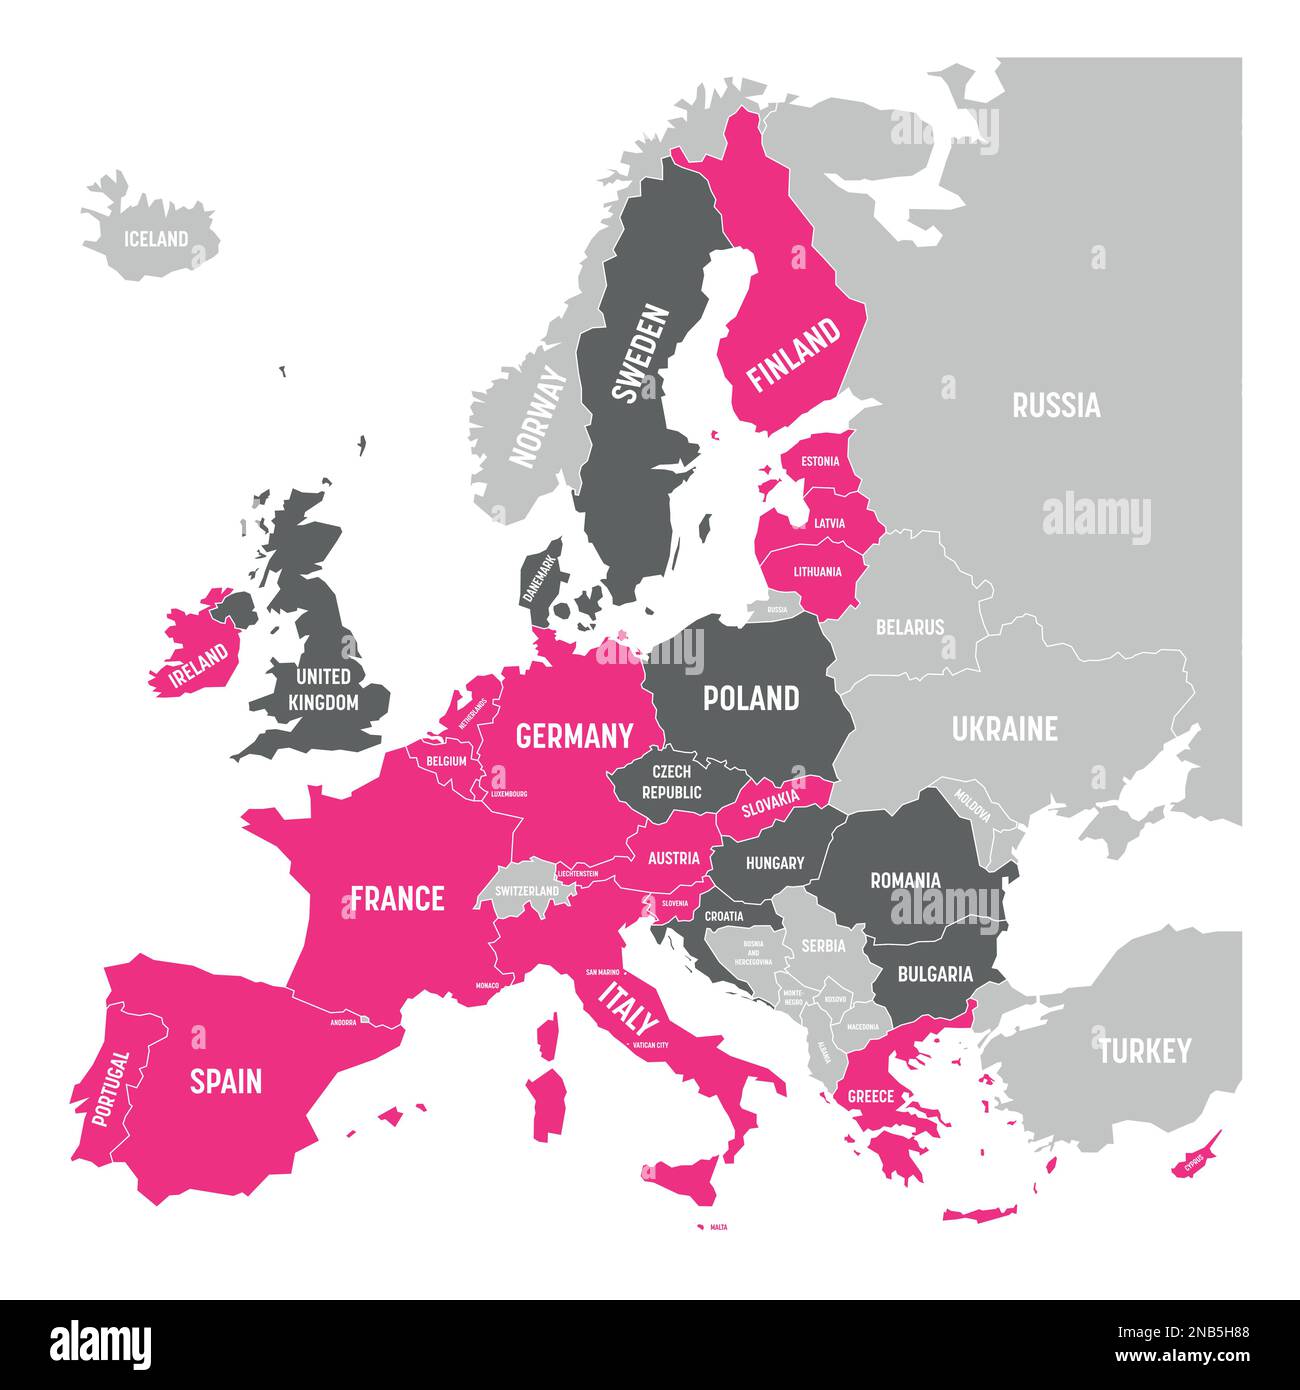 Map of Eurozone. States using Euro currency. Grey vector map with pink highlighted member countries. Stock Vector